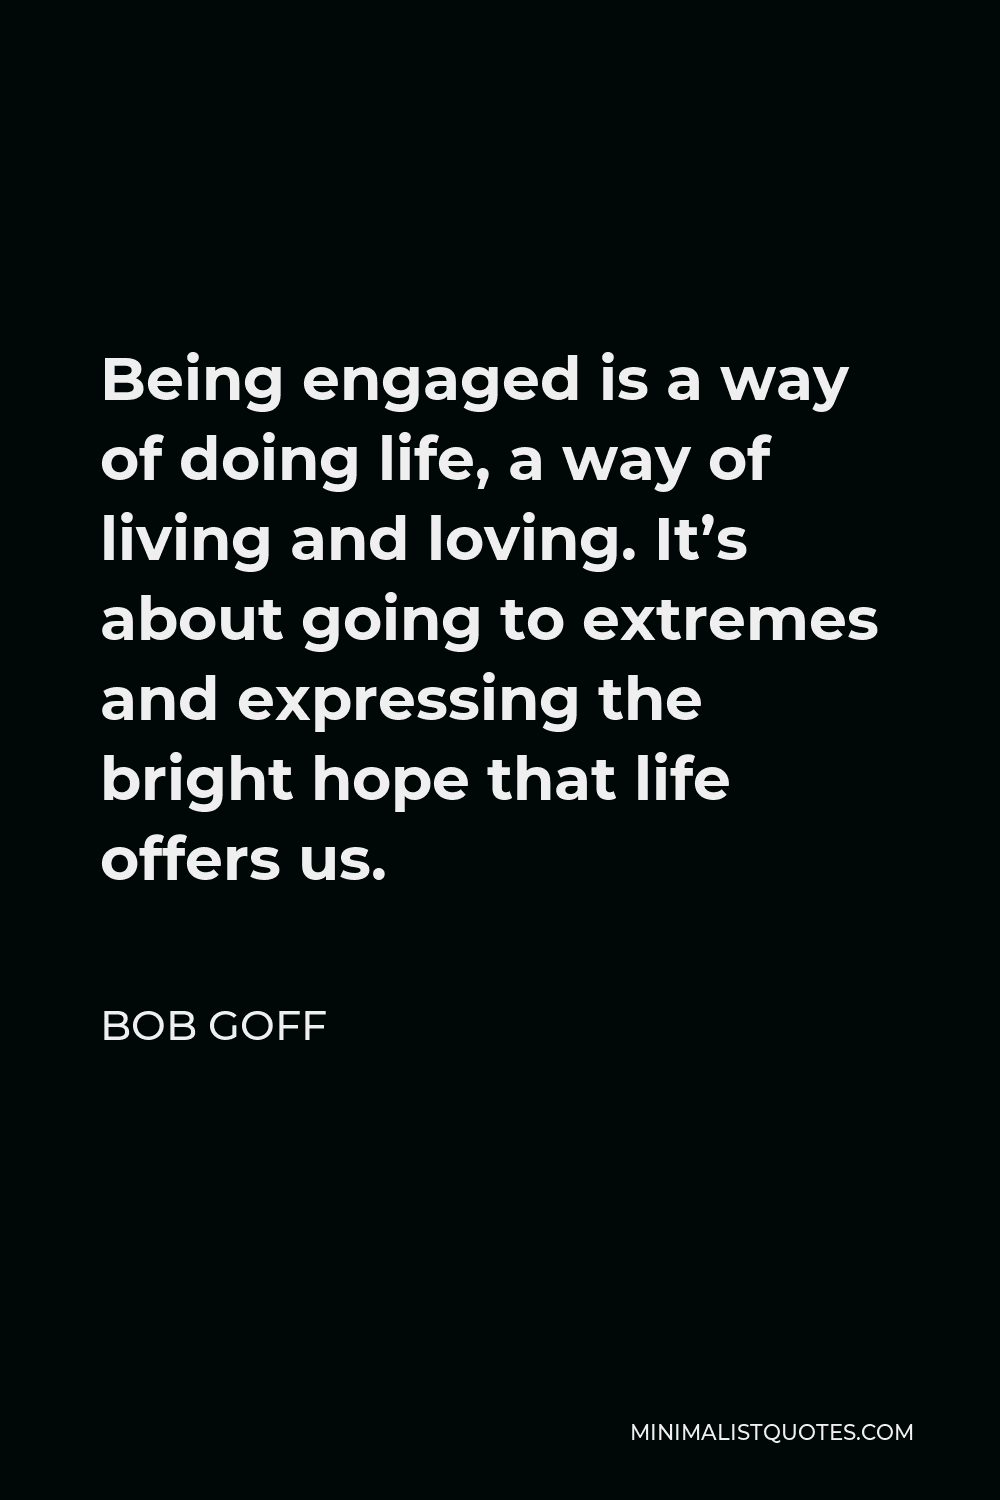 Bob Goff Quote - Being engaged is a way of doing life, a way of living and loving. It’s about going to extremes and expressing the bright hope that life offers us.